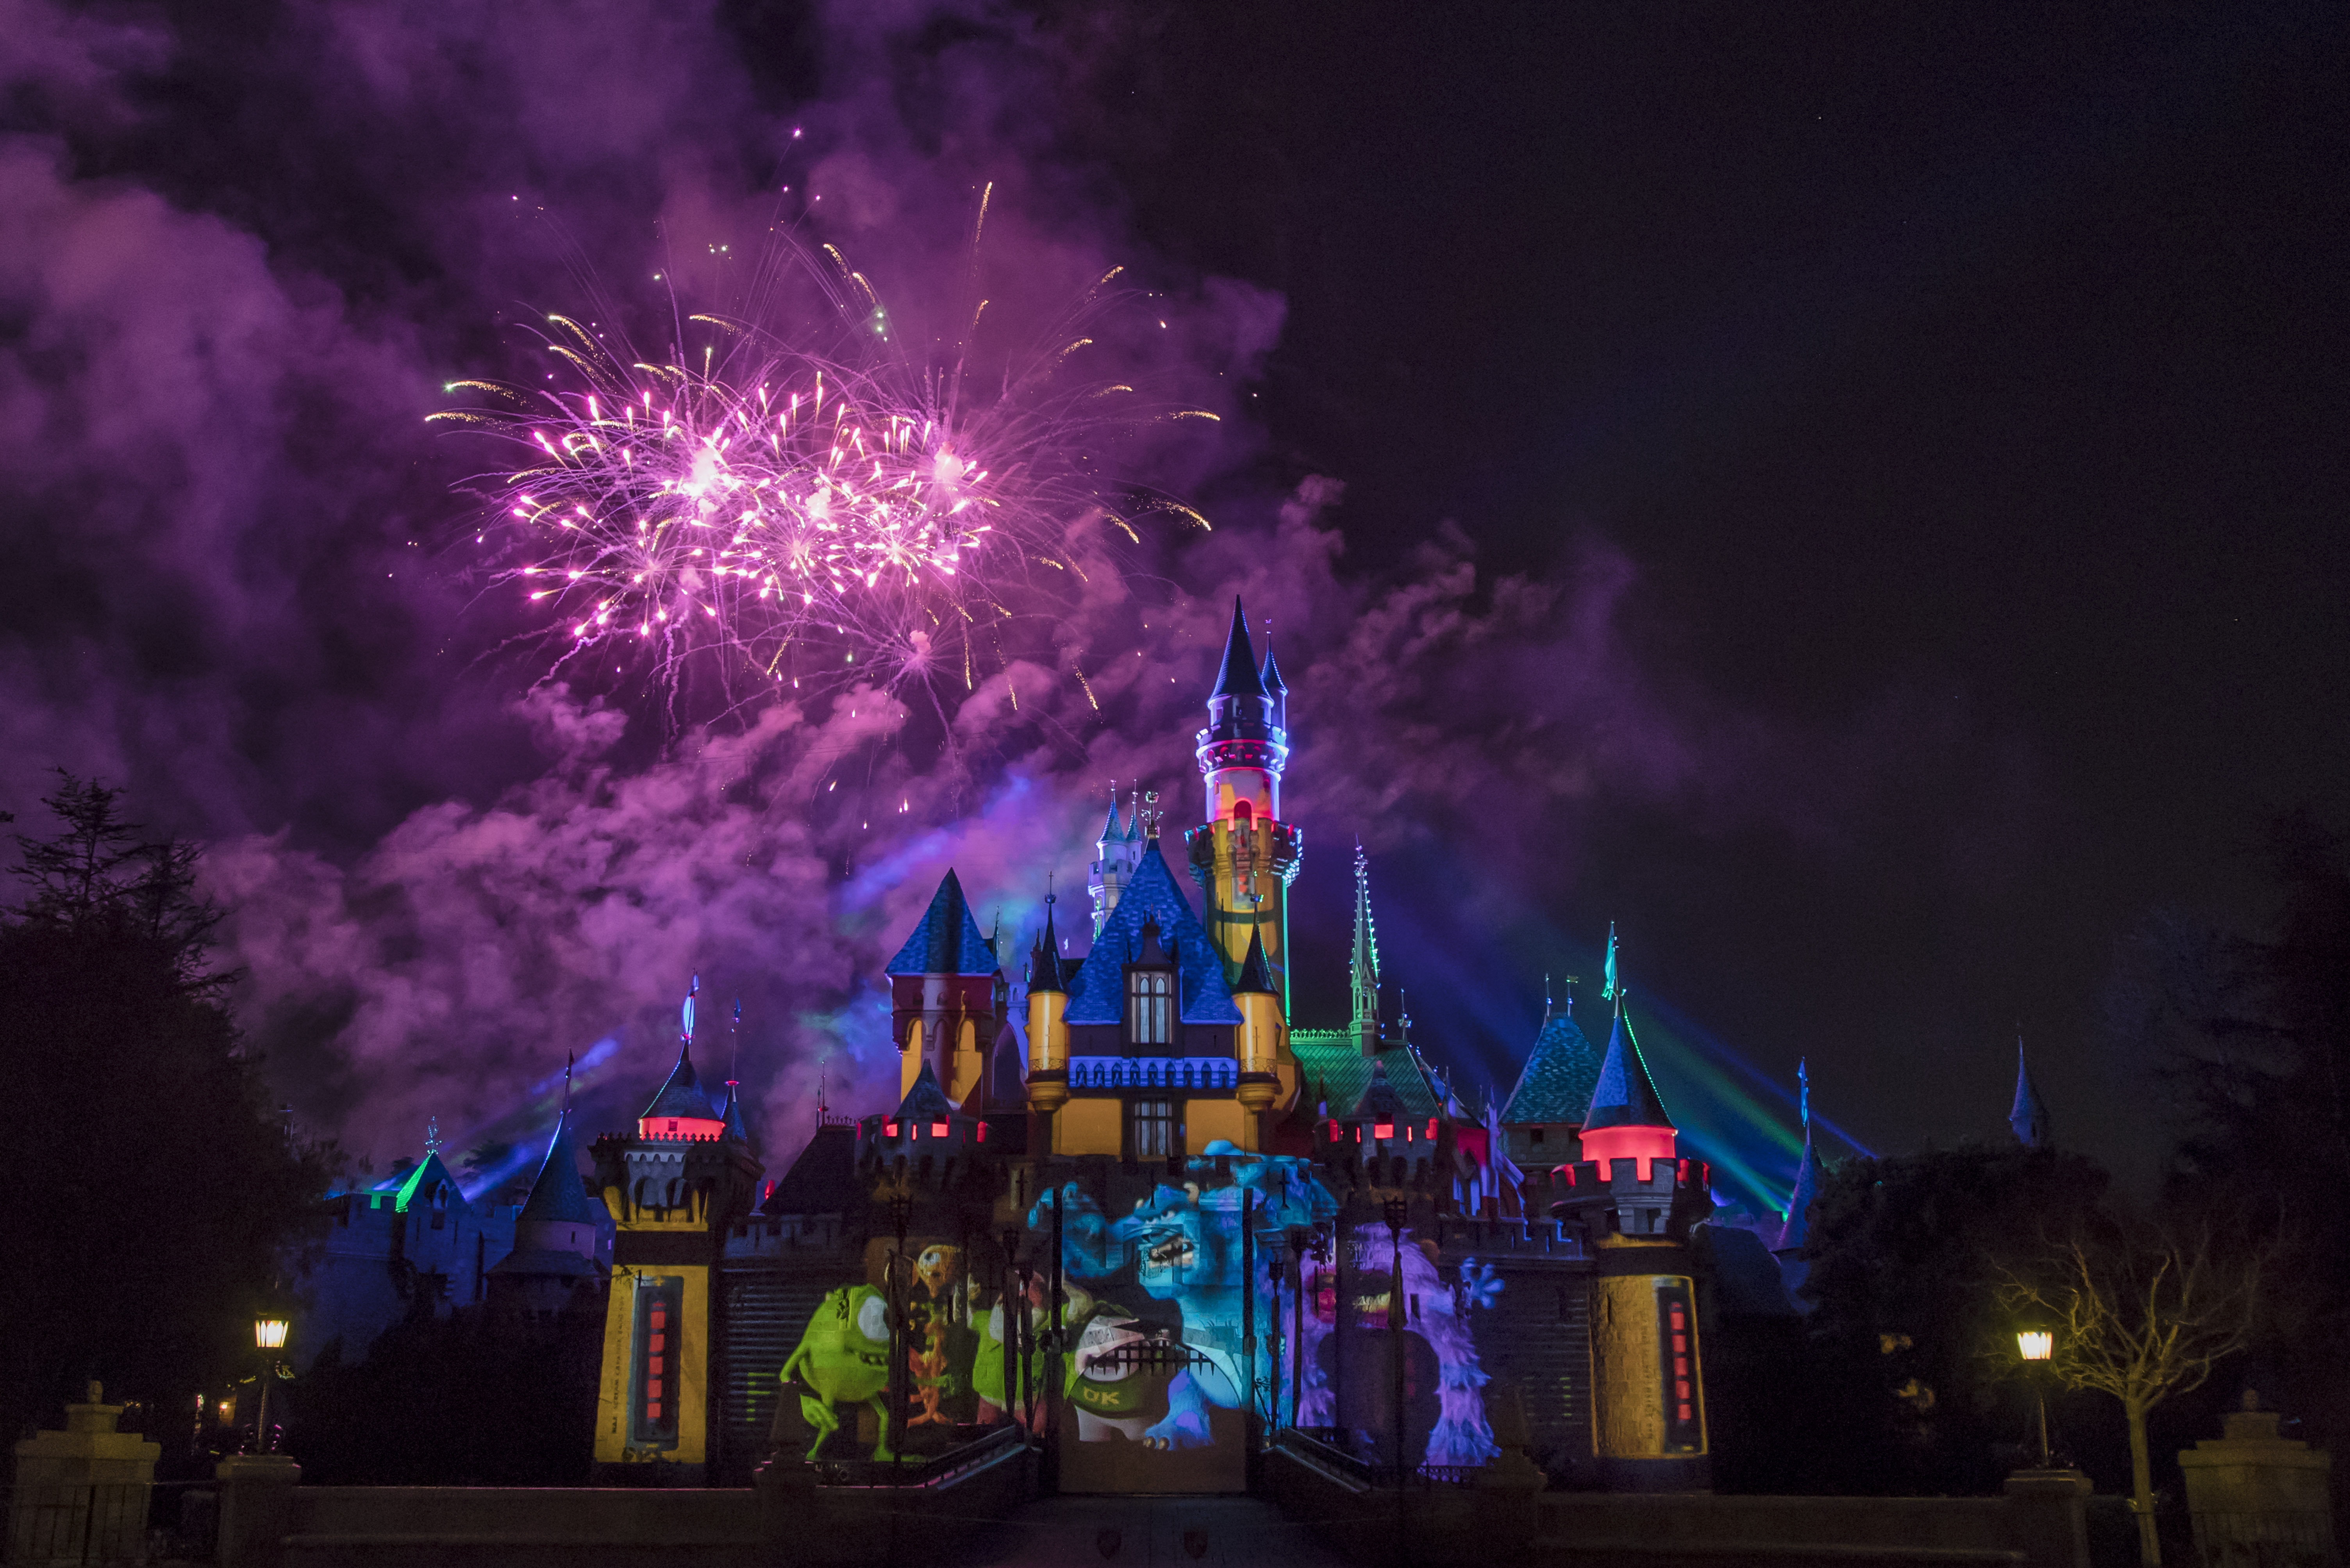 Disney Release Another Look at Together Forever – A Pixar Nighttime Spectacular Coming to Disneyland on April 13 for Pixar Fest